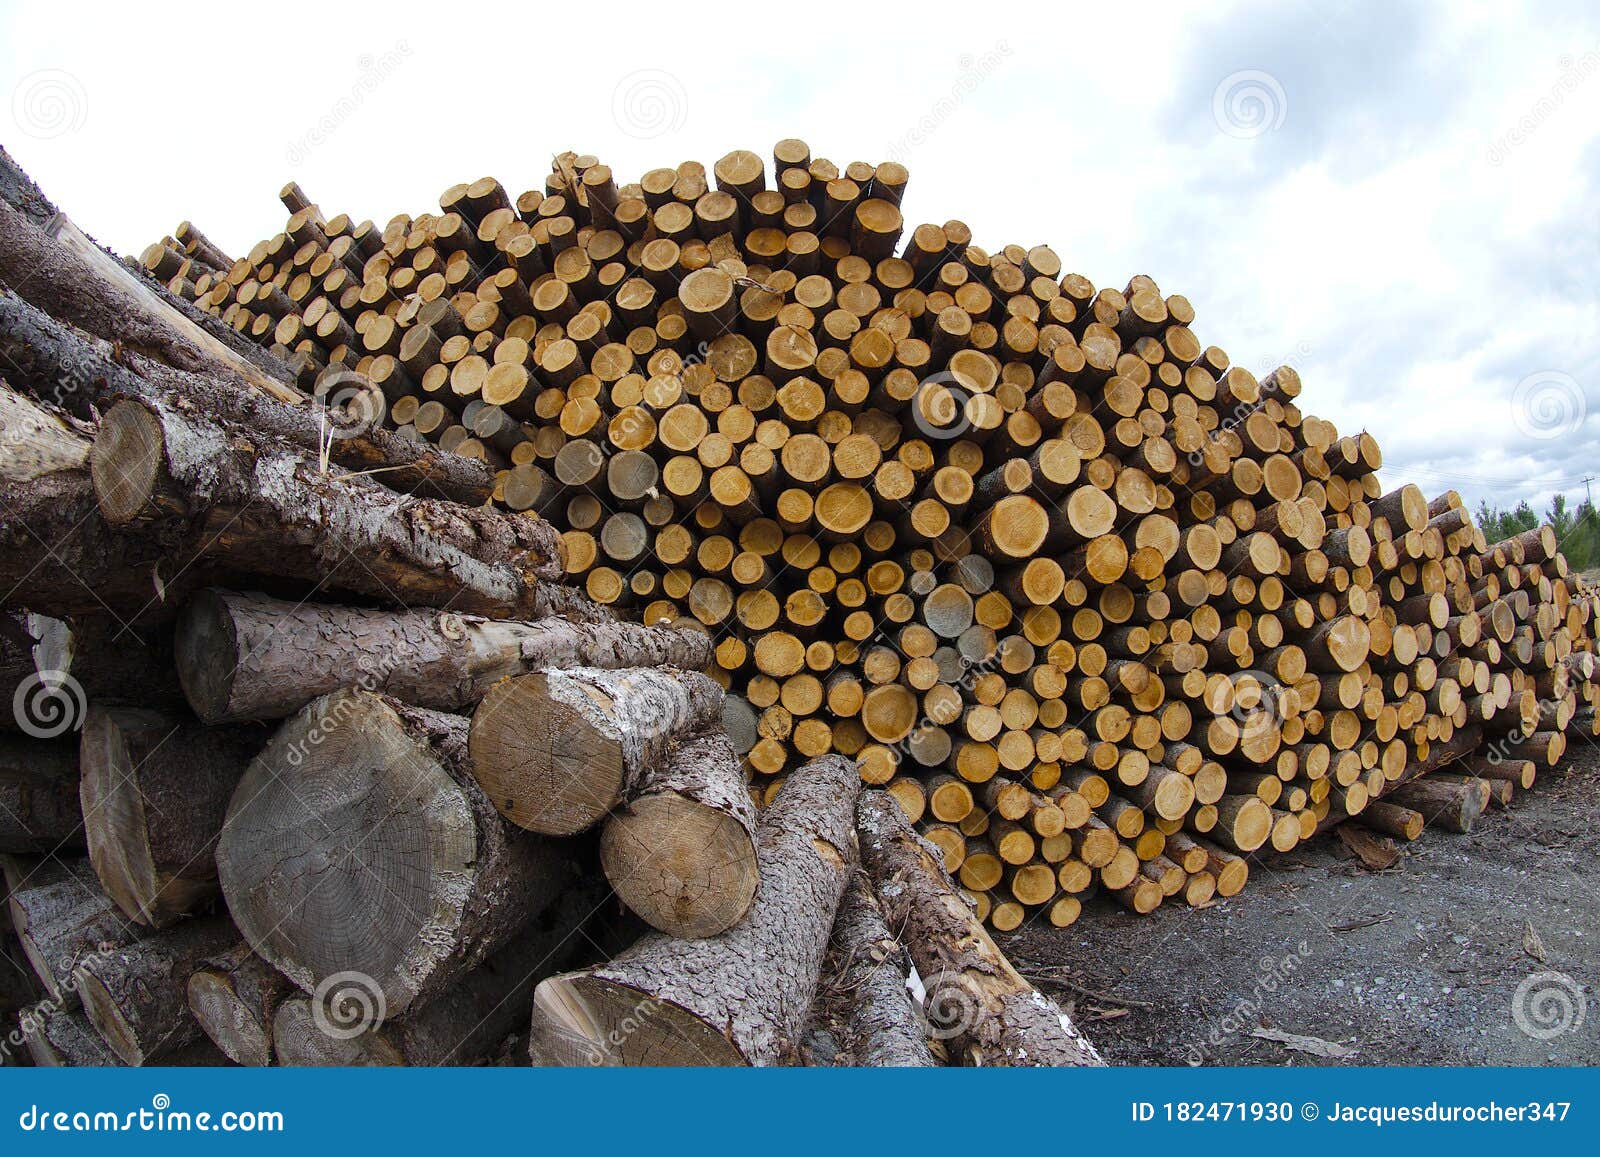 How Many Trees in a Cord of Wood 